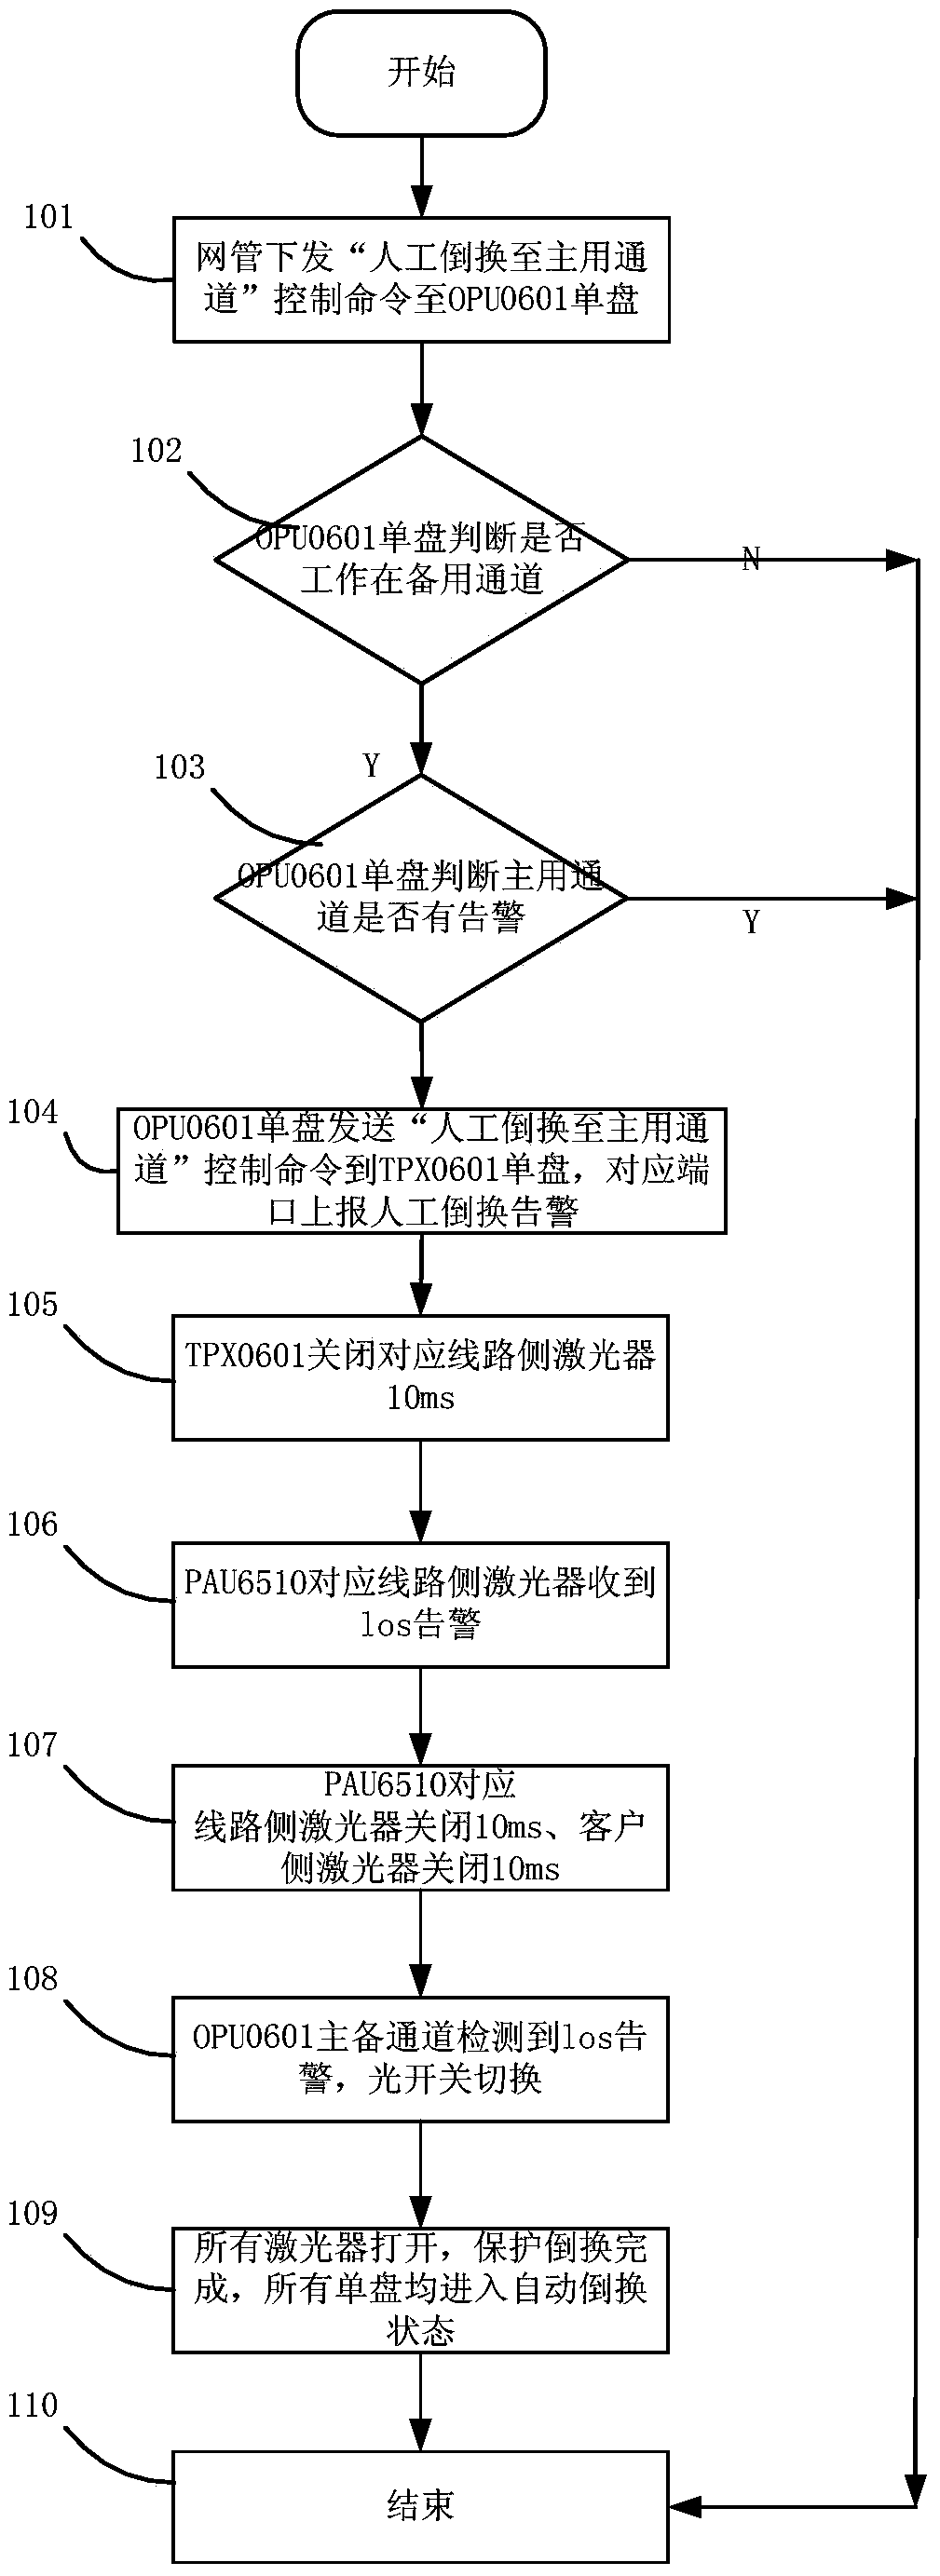 Protection switching method of mobile communication system based on c-ran architecture